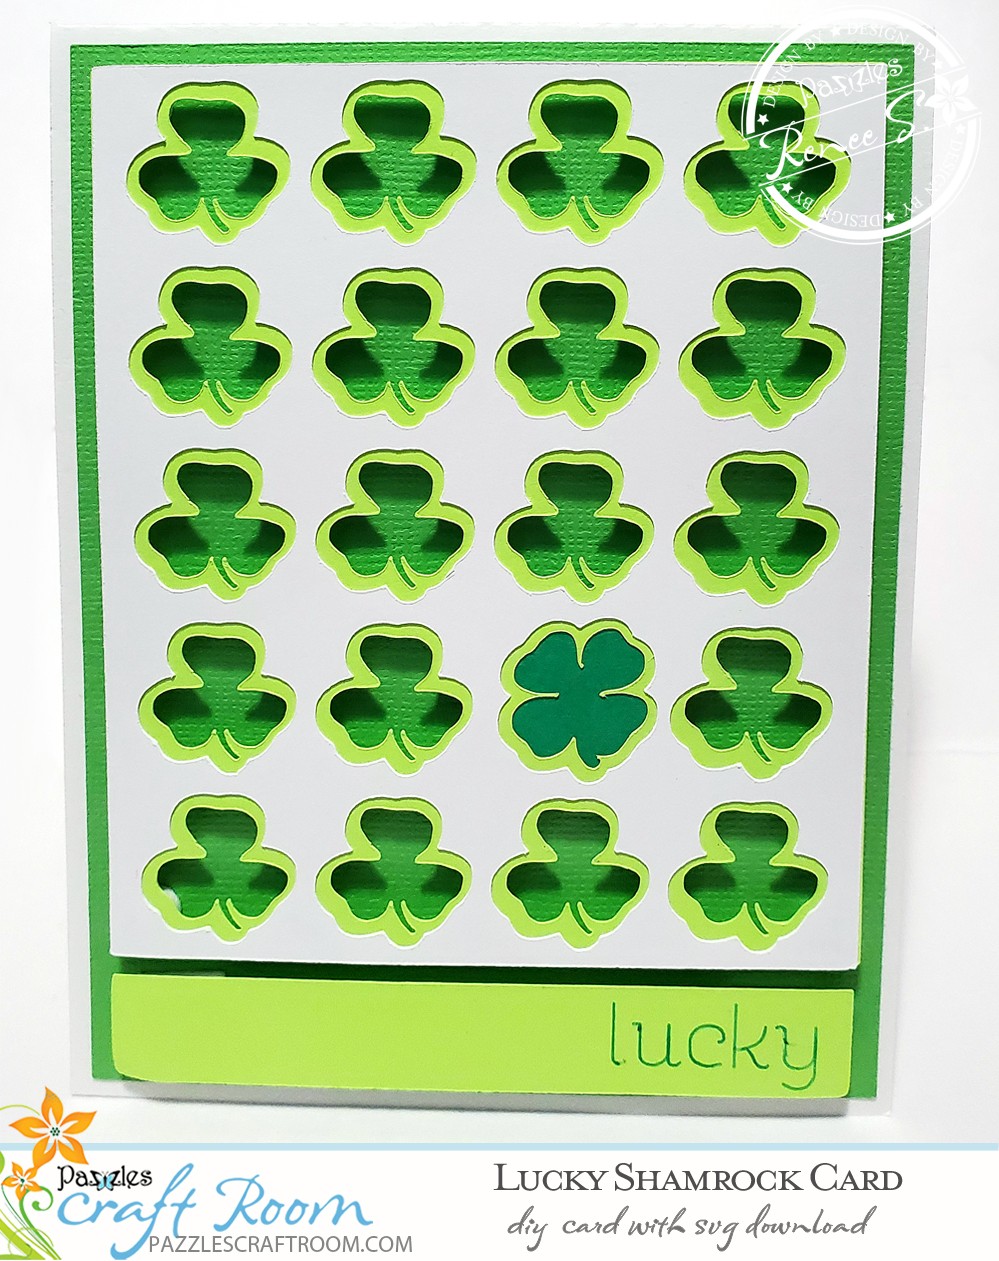 Pazzles DIY Lucky Shamrock Card with instant SVG download.  Instant SVG download compatible with all major electronic cutters including Pazzles Inspiration, Cricut, and Silhouette Cameo. Design by Renee Smart.